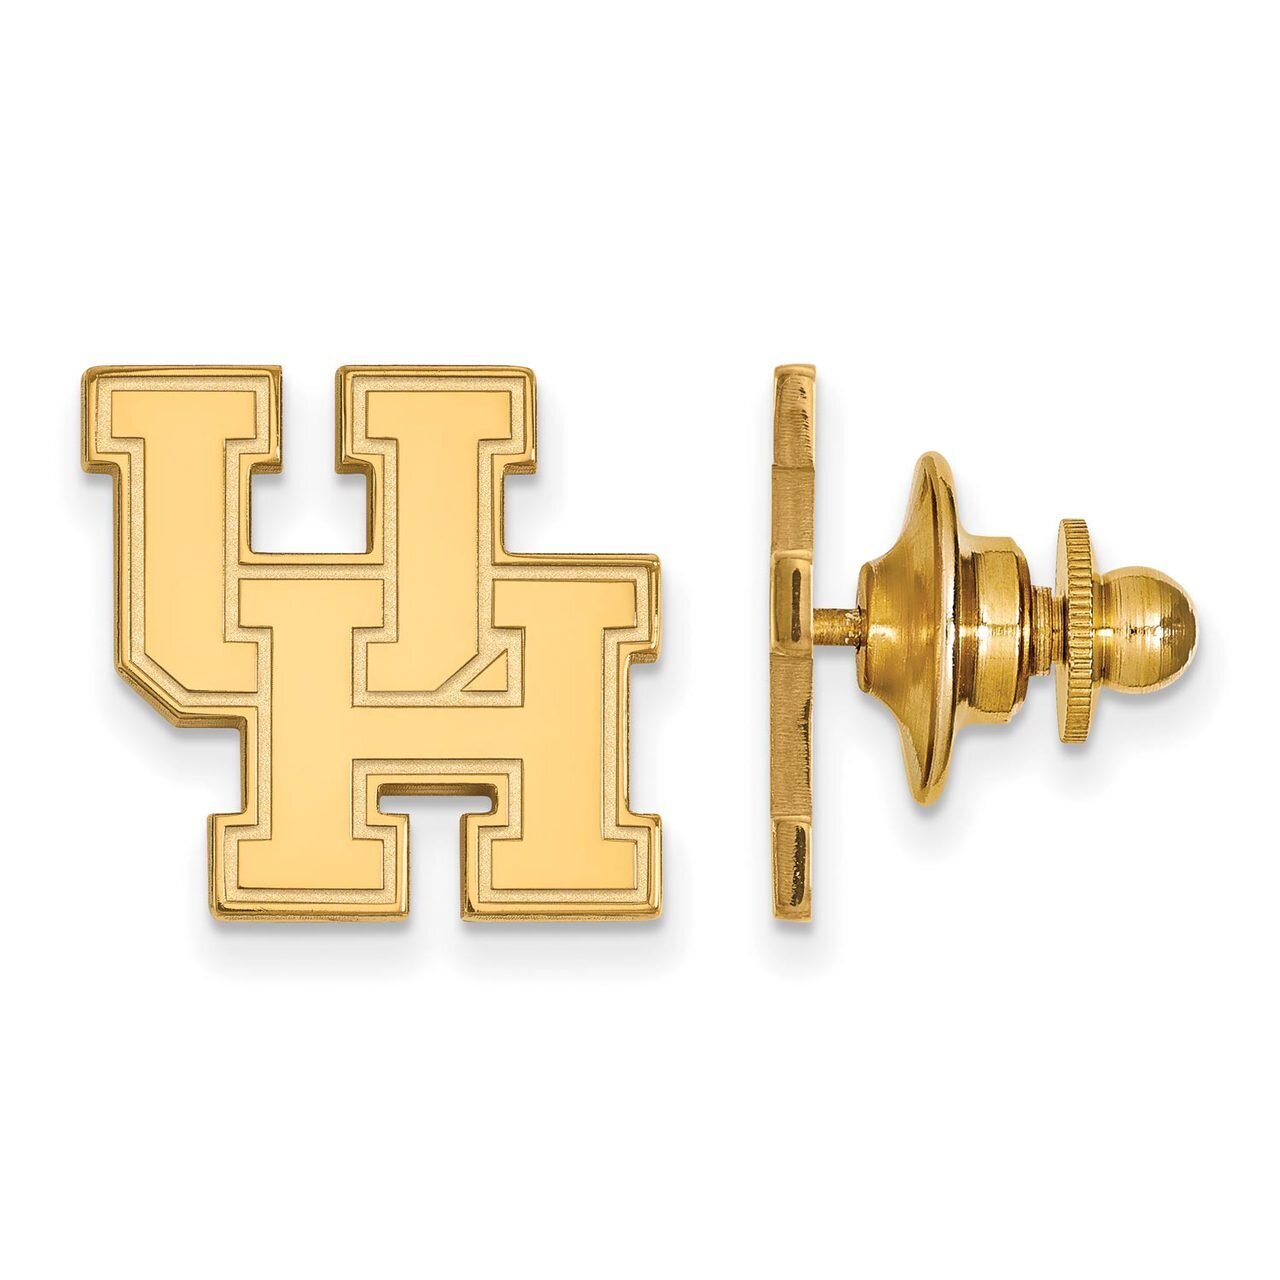 University of Houston Lapel Pin Gold-plated Silver GP009UHO